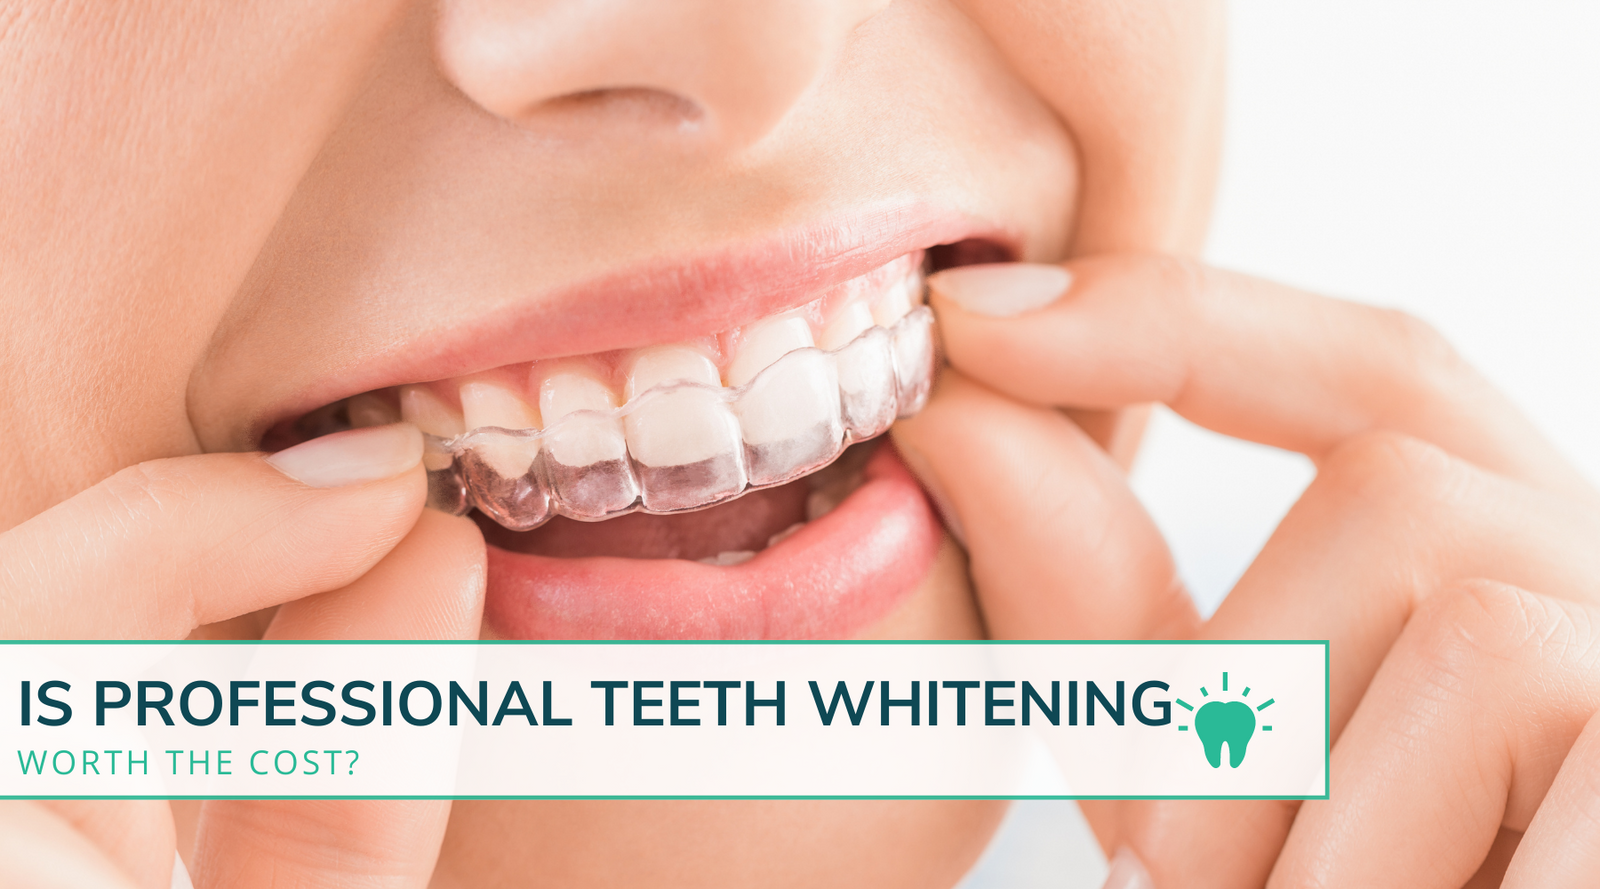 Is the Cost of Professional Teeth Whitening Worth It?